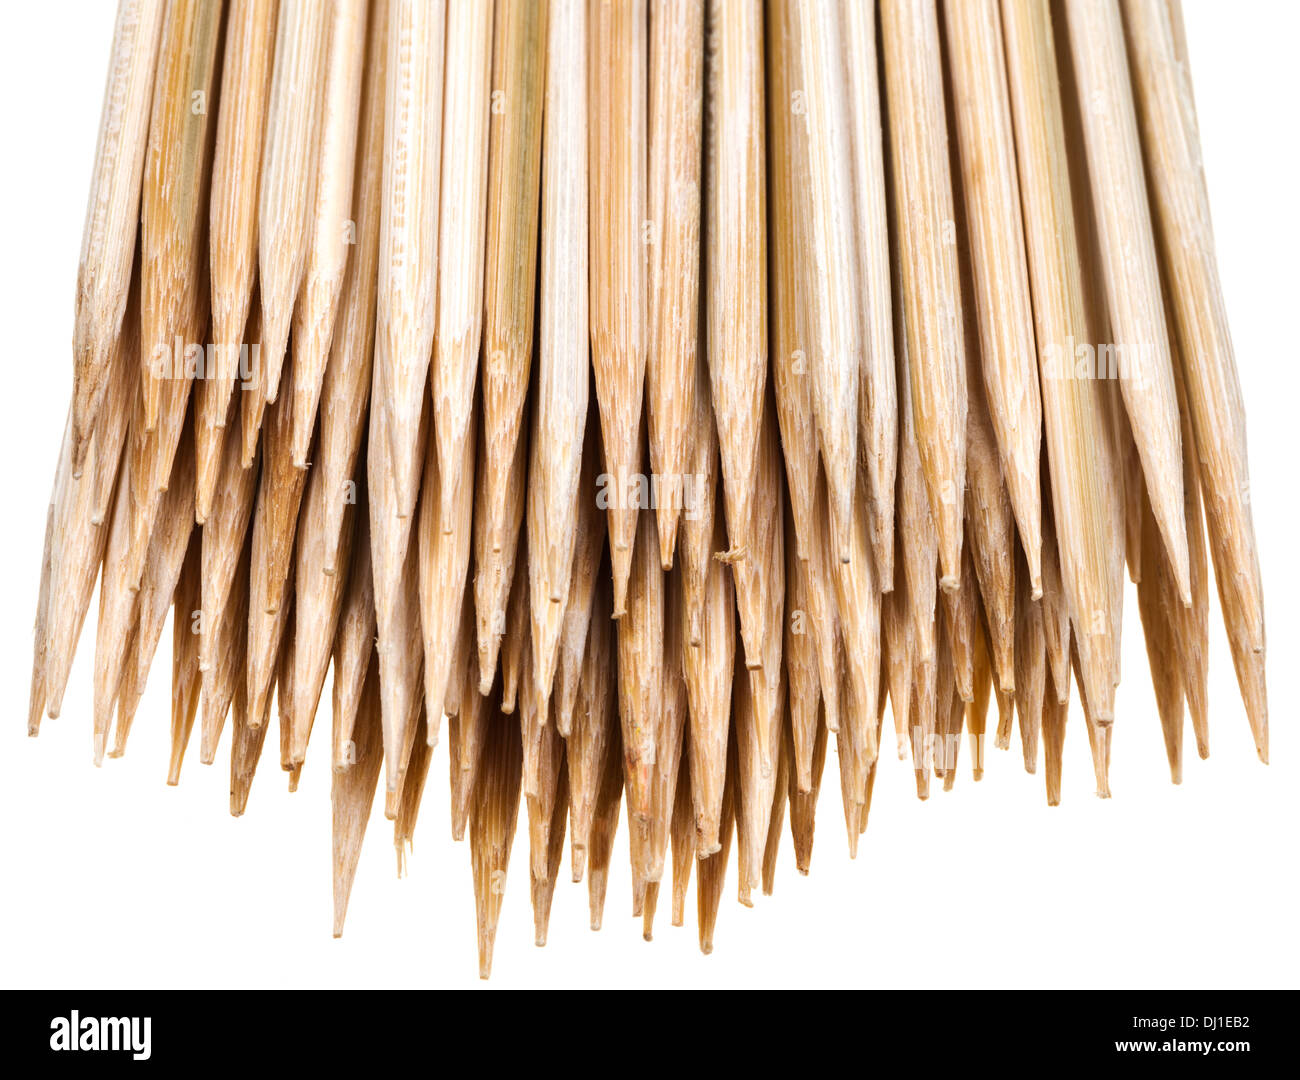 close up of wooden pegs, pointed wood pegs, wooden sticks, sharp sticks,  wooden pointed stick, wooden pointed sticks Stock Photo - Alamy